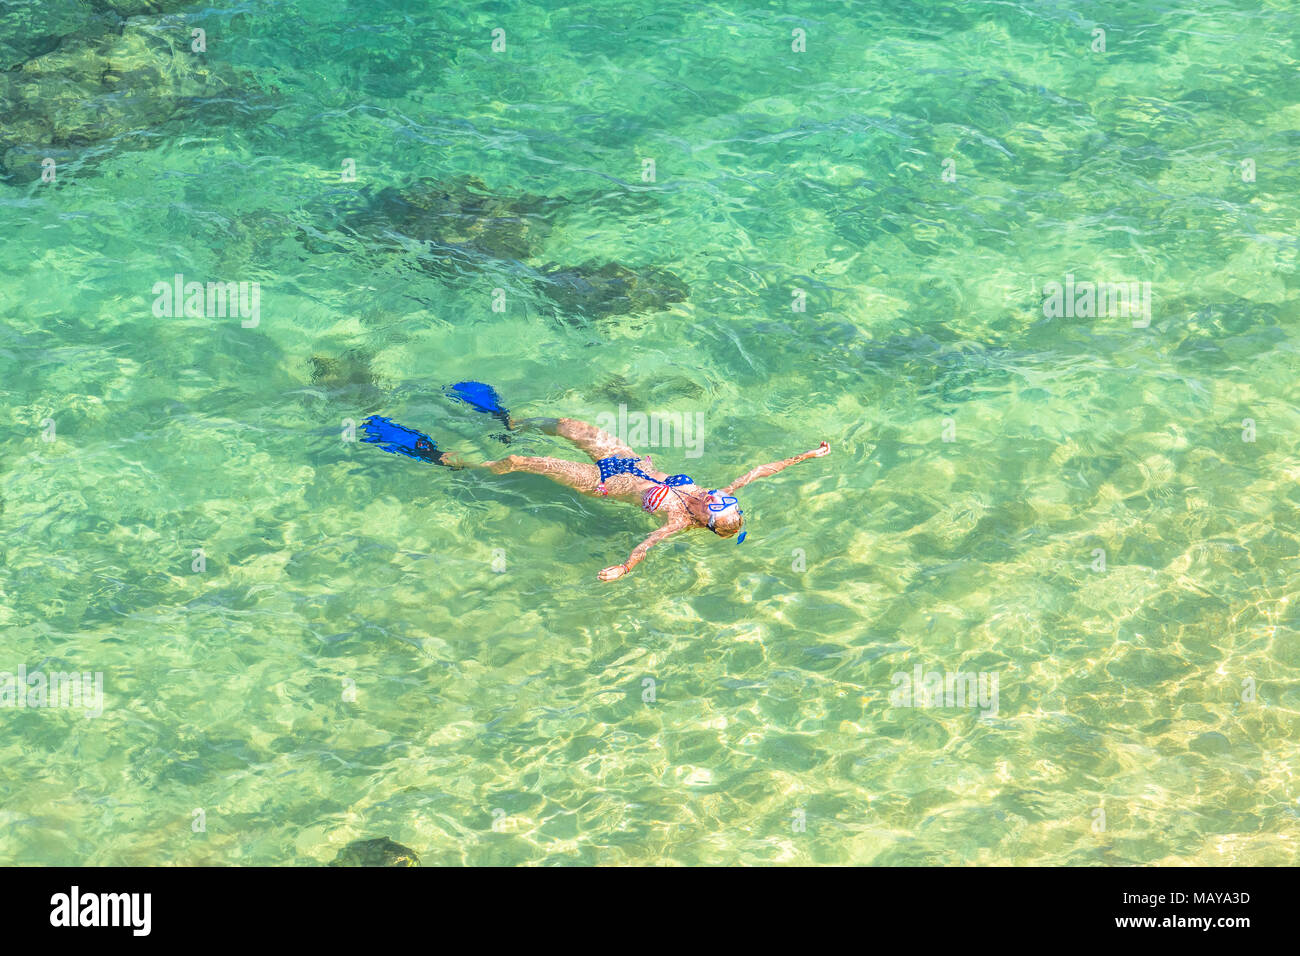 Woman snorkeling over coral reef in Hanauma Bay Nature Preserve, Oahu, Hawaii, USA. Female lying above the crystalline water in tropical sea with american flag bikini. Watersport activity in Hawaii. Stock Photo